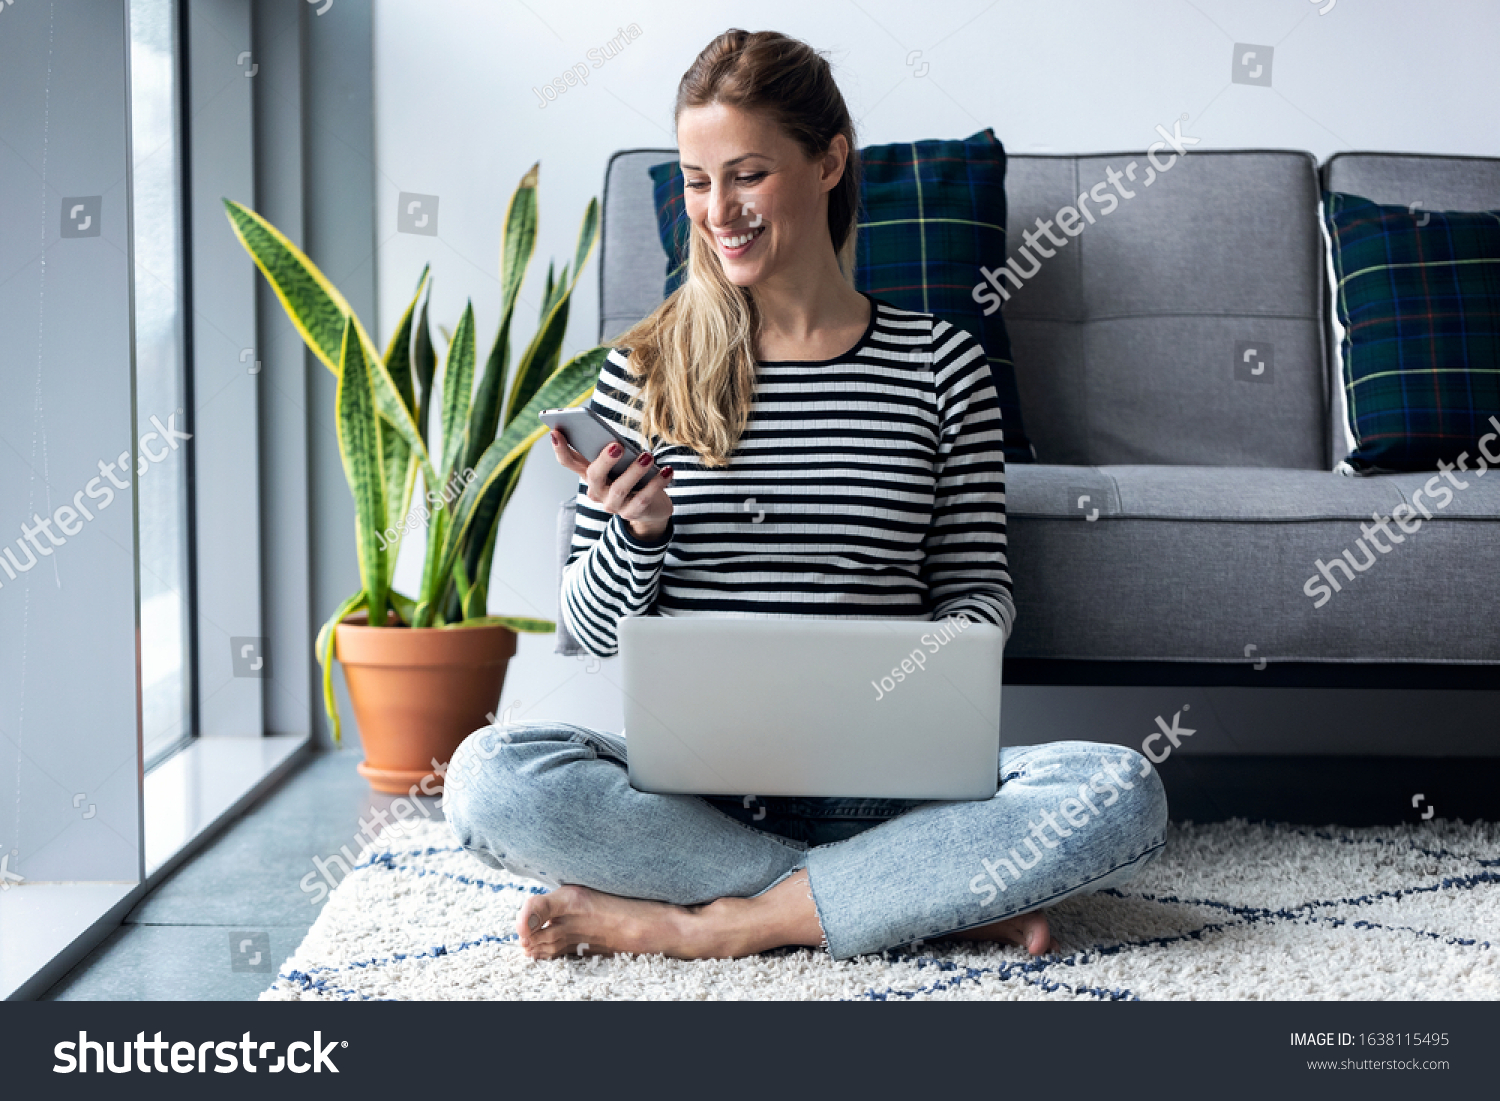 Shot of pretty young woman using her mobile phone while working with laptop sitting on the floor at home. #1638115495